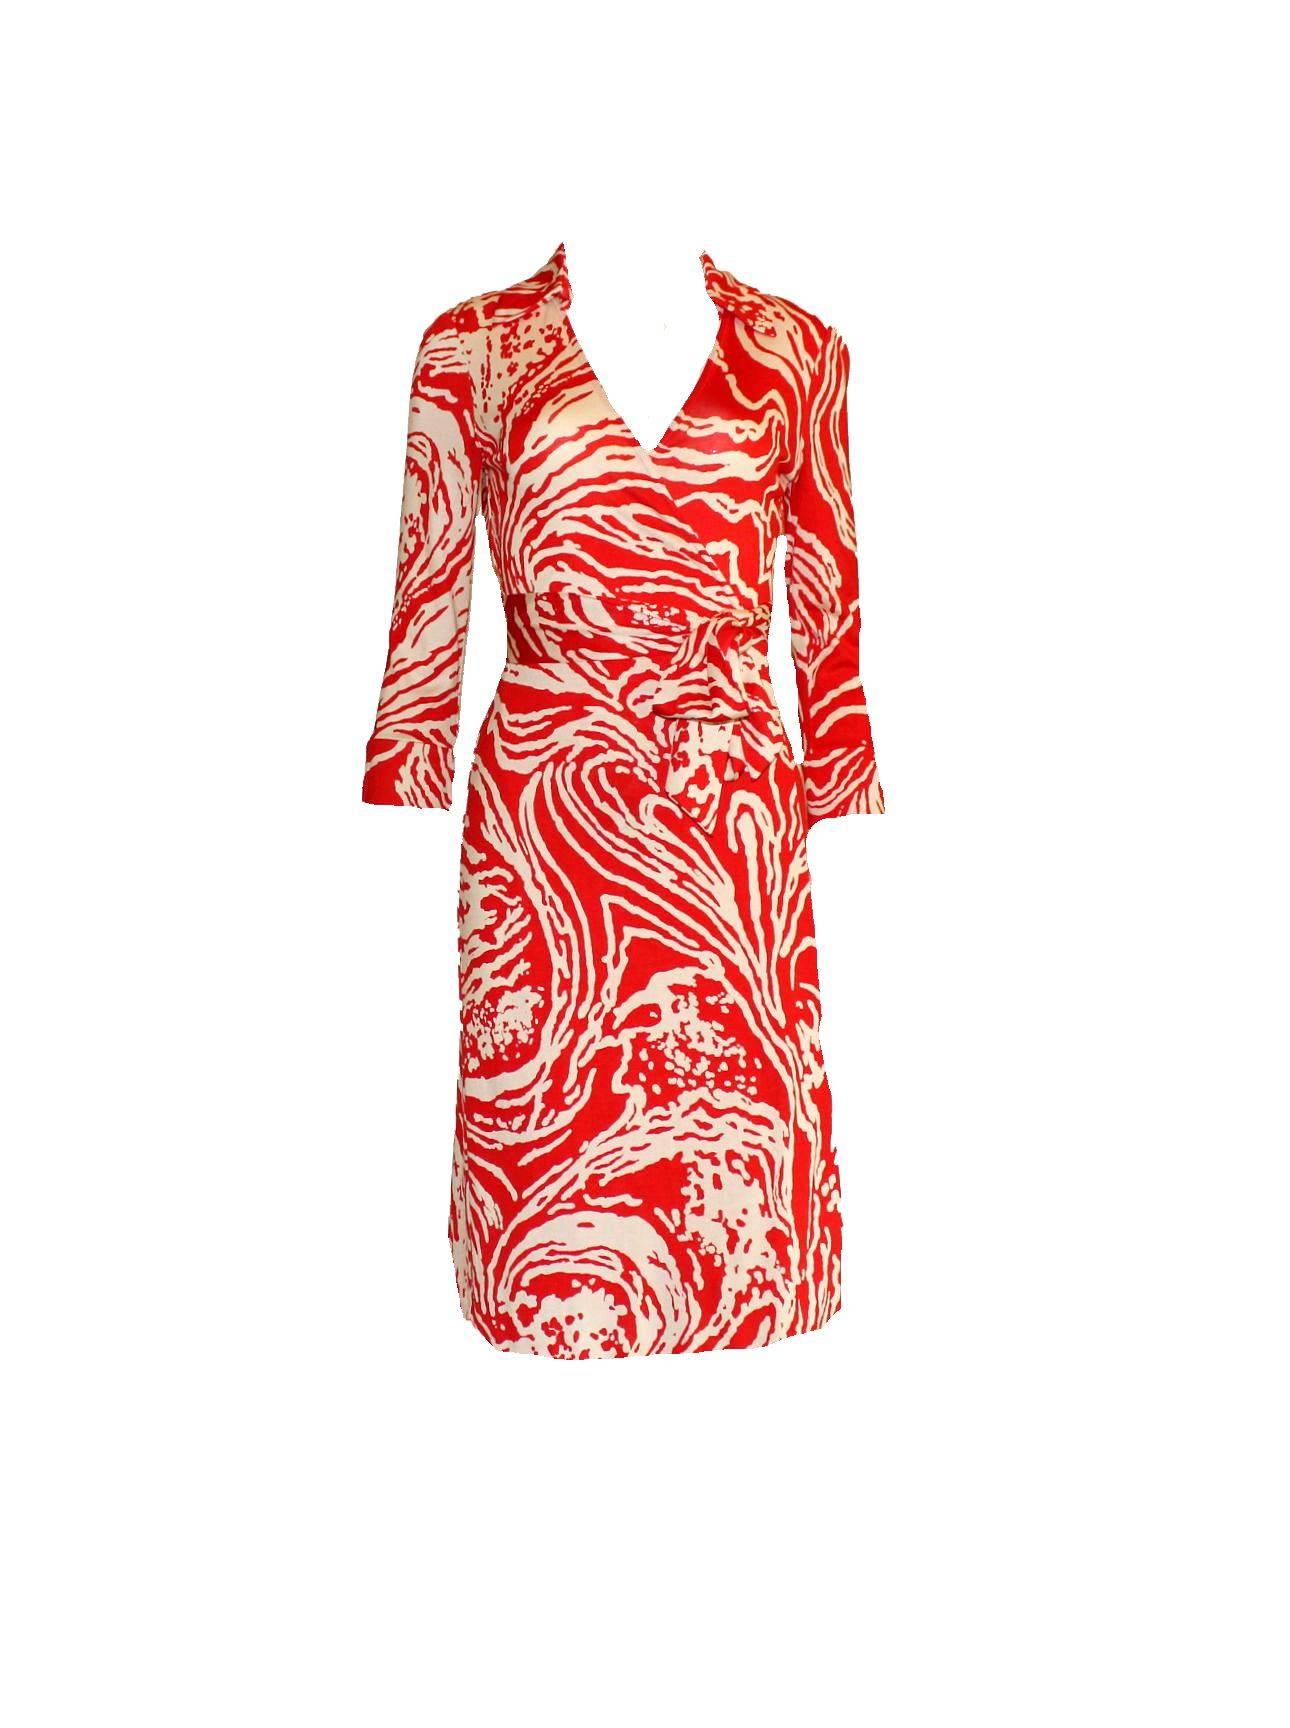 Stunning DVF Wrap Dress
Famous vintage print reissued 
Featured by Iggy Azalea in her video
Wrap dress
With collar
3/4-length sleeves
Hidden push button in front to avoid a too open cleavage
Finest silk jersey 
100% pure silk
Brandnew
Impossible to